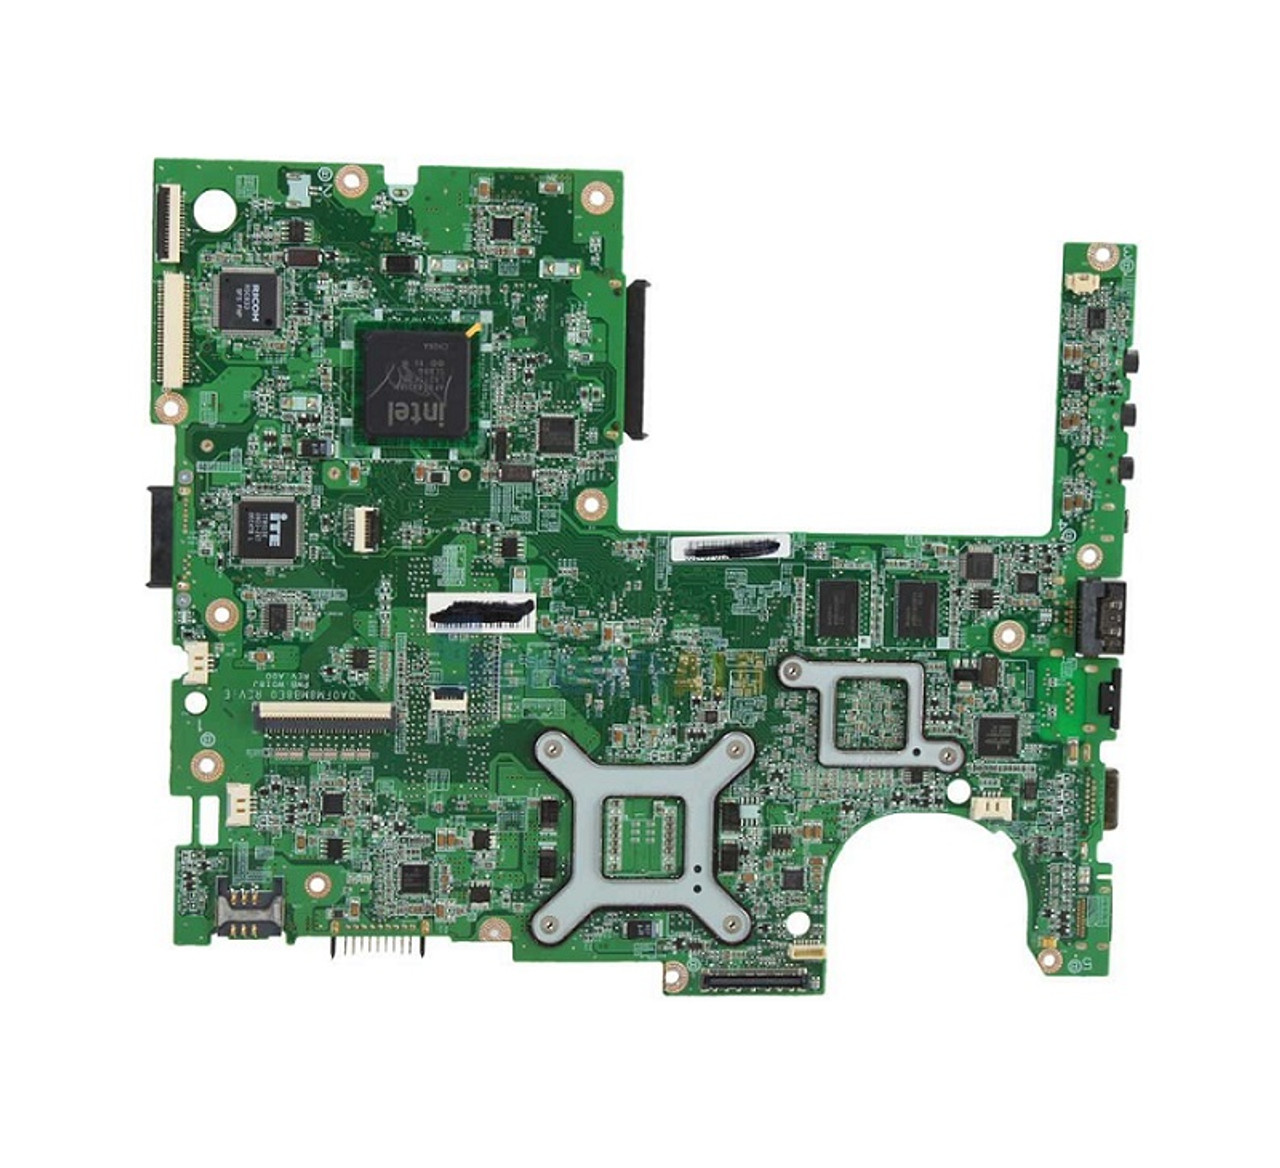 0Y4801 - Dell System Board (32MB Video) for Inspiron 600m, Latitude D600 (Refurbished)